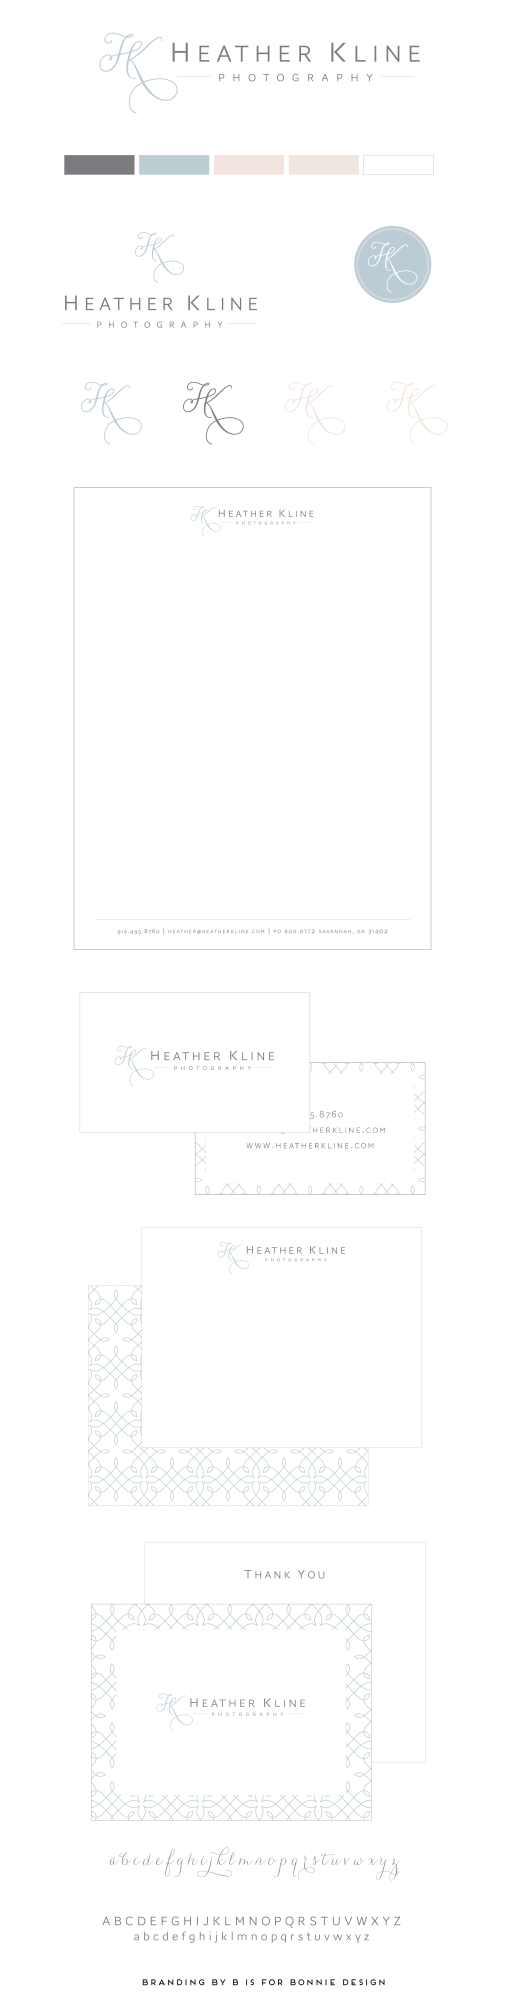 a southern + romantic rebrand for Heather Kline Photography | b is for bonnie design